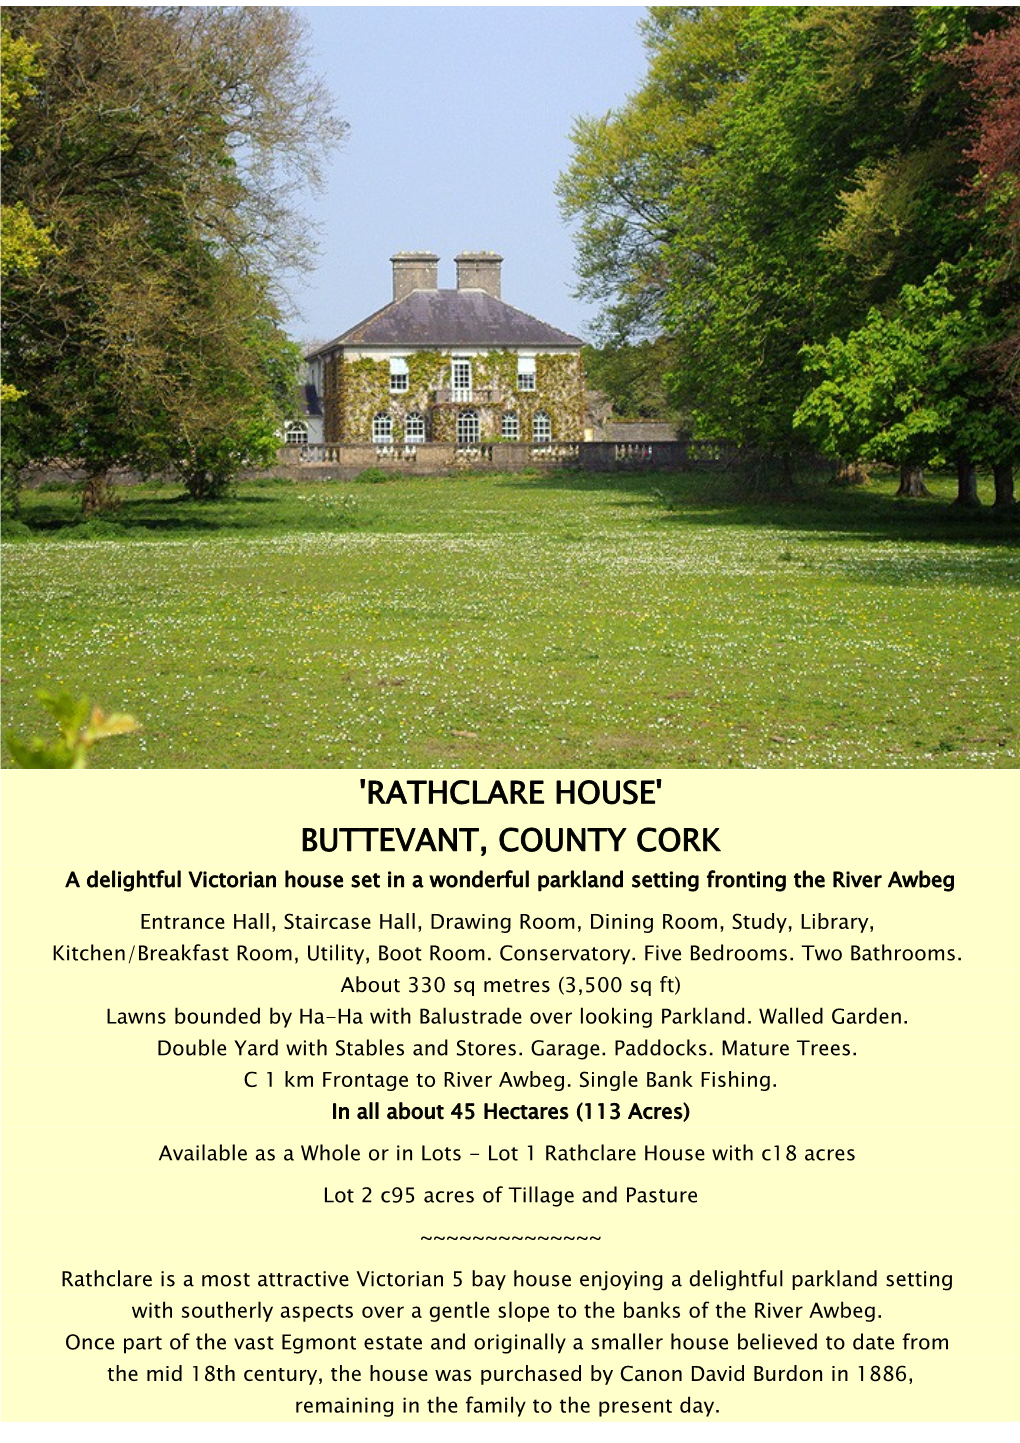 BUTTEVANT, COUNTY CORK a Delightful Victorian House Set in a Wonderful Parkland Setting Fronting the River Awbeg